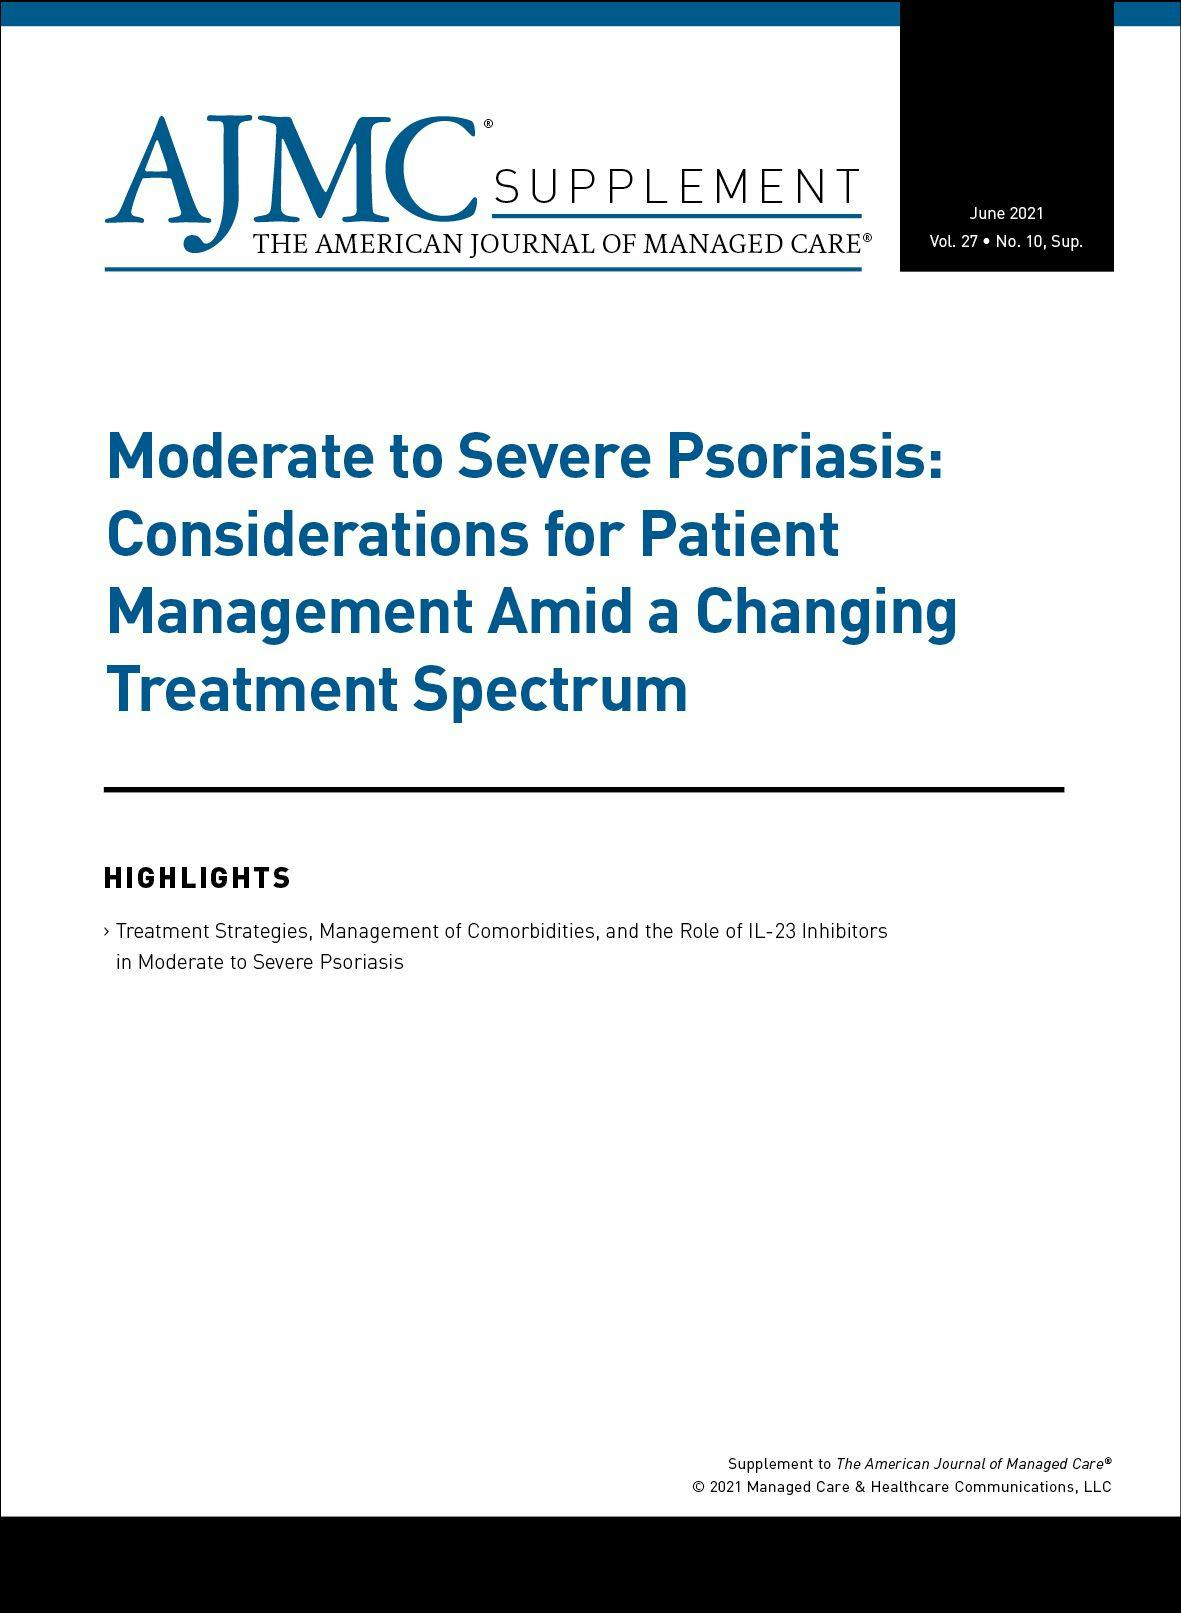 Moderate to Severe Psoriasis: Considerations for Patient Management Amid a Changing Treatment Spectrum